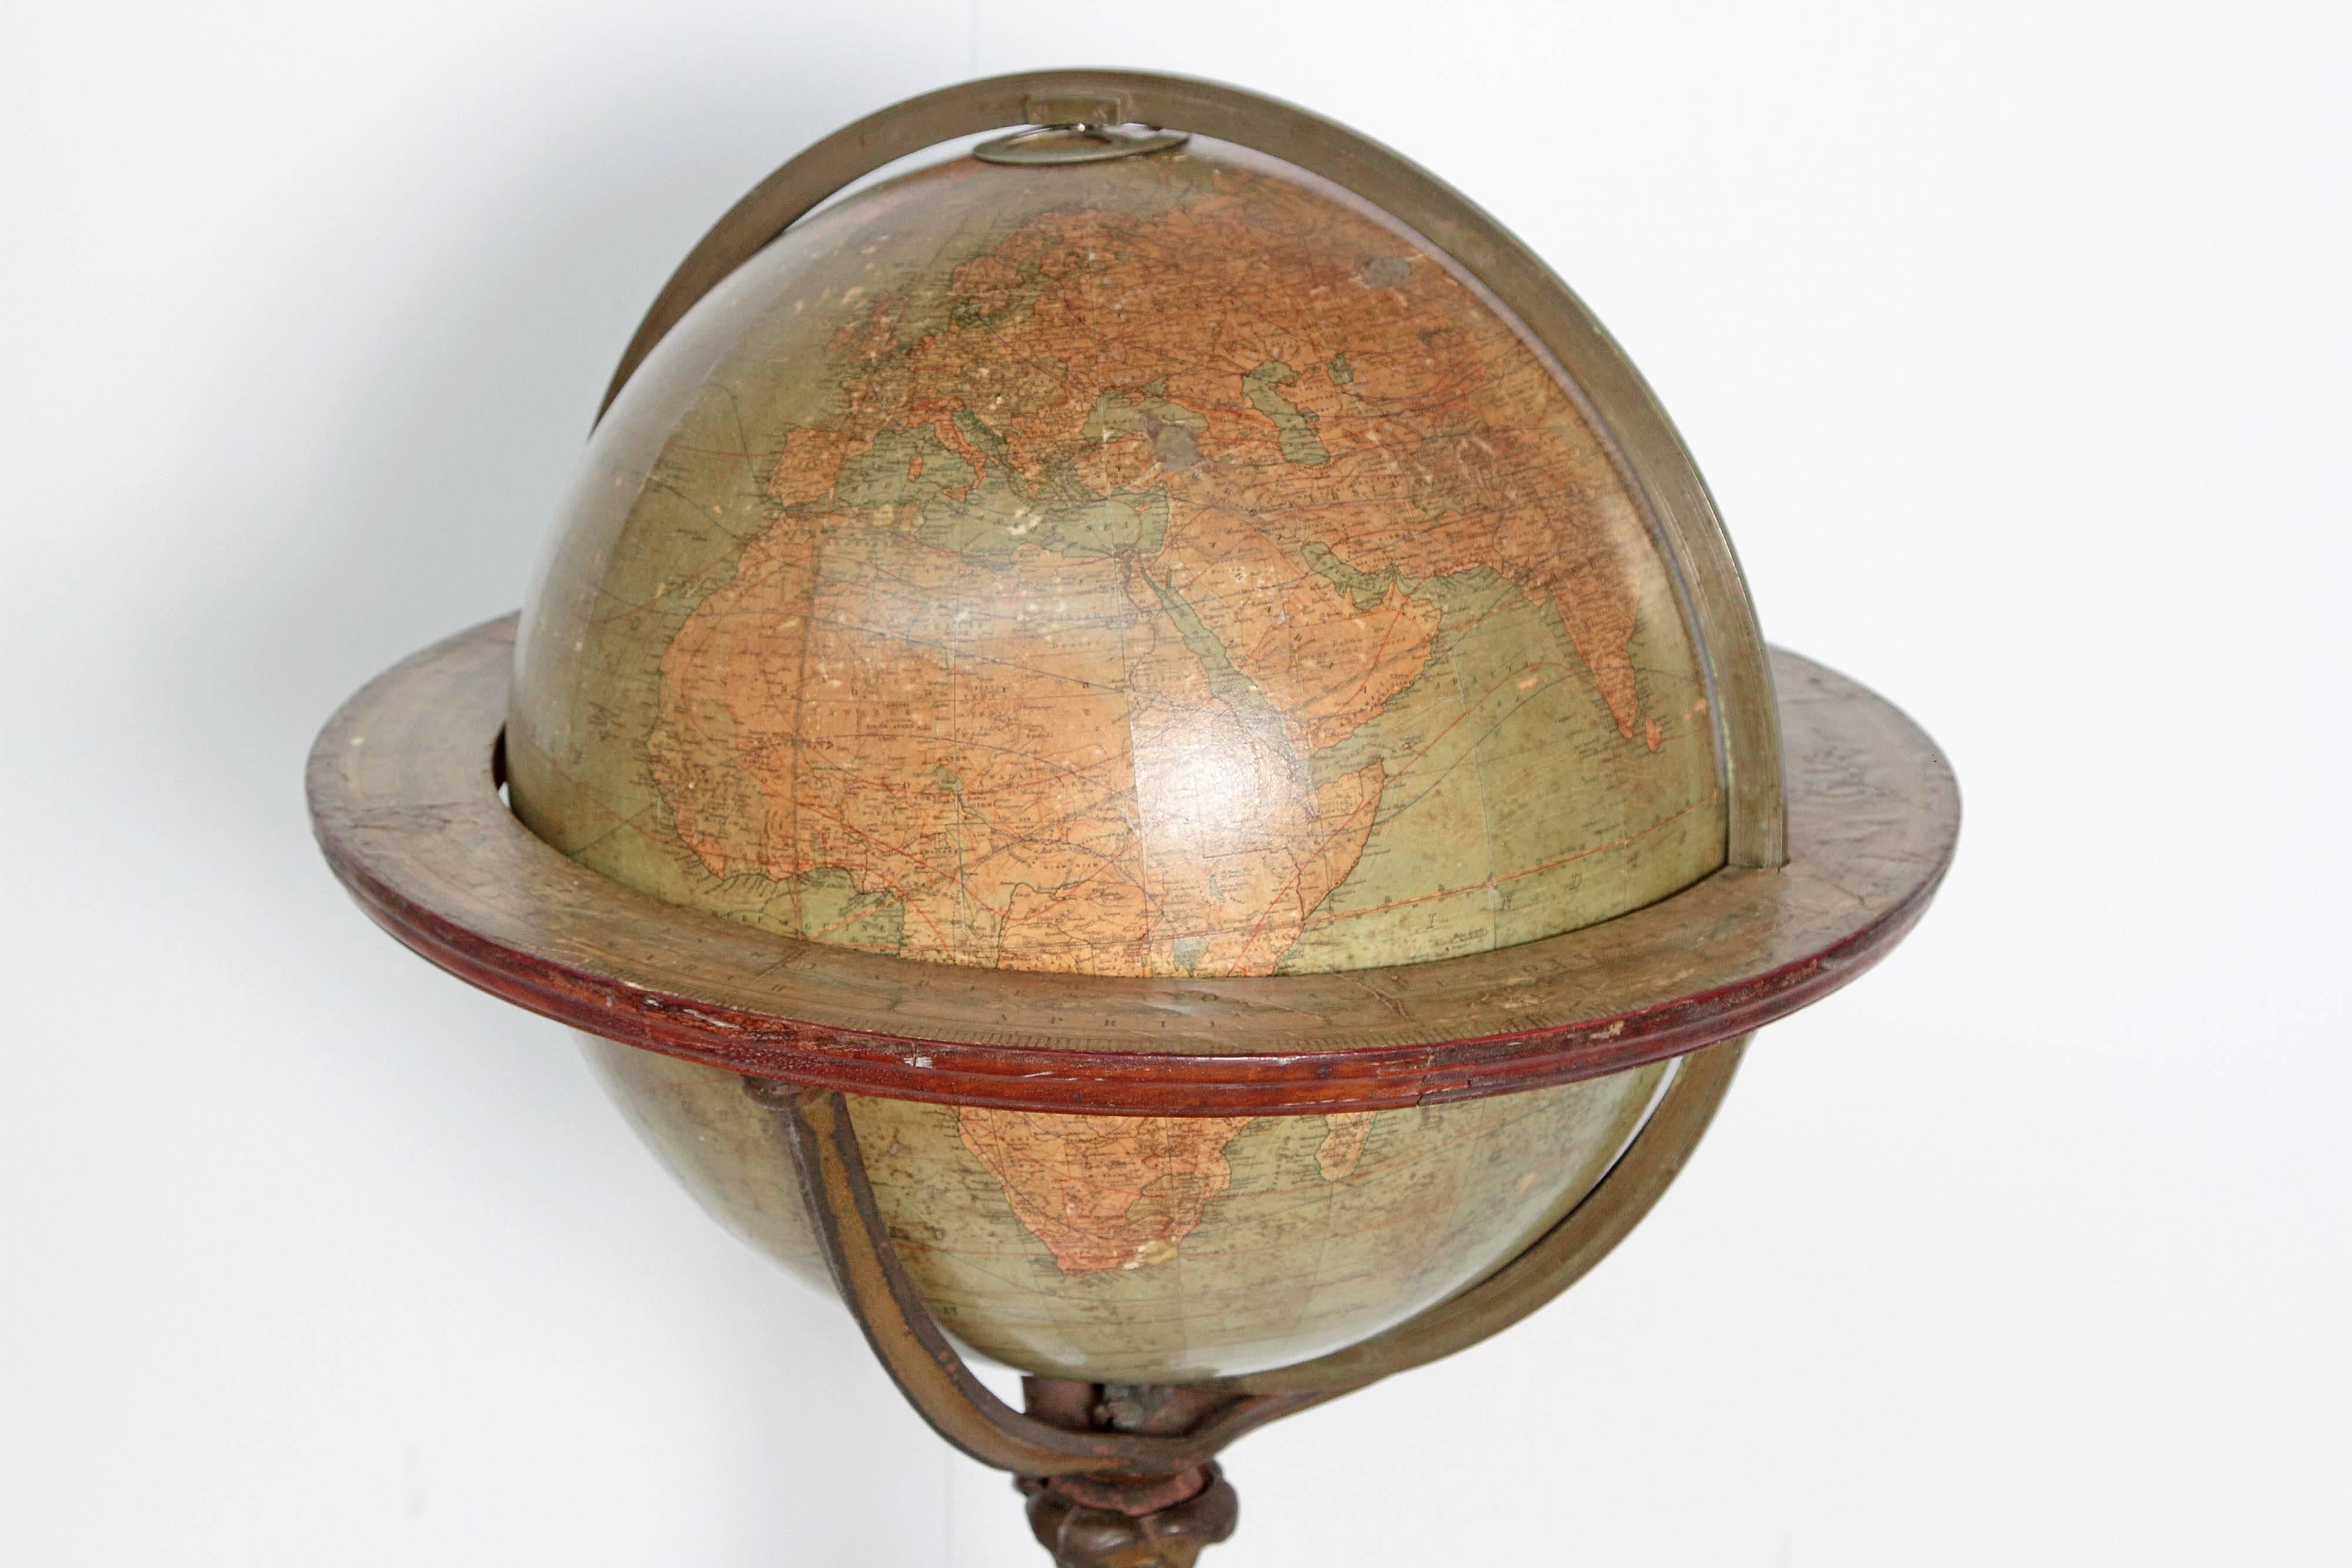 English terrestrial globe on stand by W. & A.K. Johnston, Limited, Geographers; Engravers & Printers, Edinburgh and London. Exquisite cast iron acanthus leaf tripod floor stand base on castors, circa 1890.
 